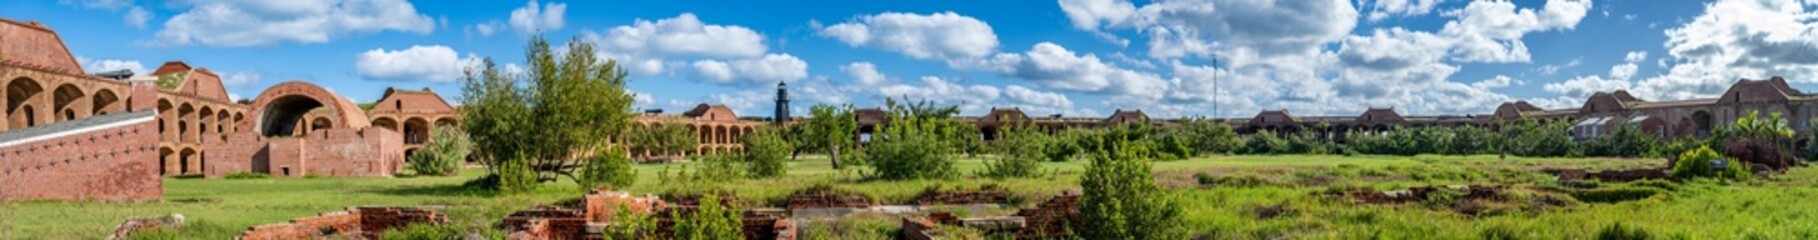 Panoramic of the inner ruined courtyard of Fort Jefferson on Dry Tortugas National Park.